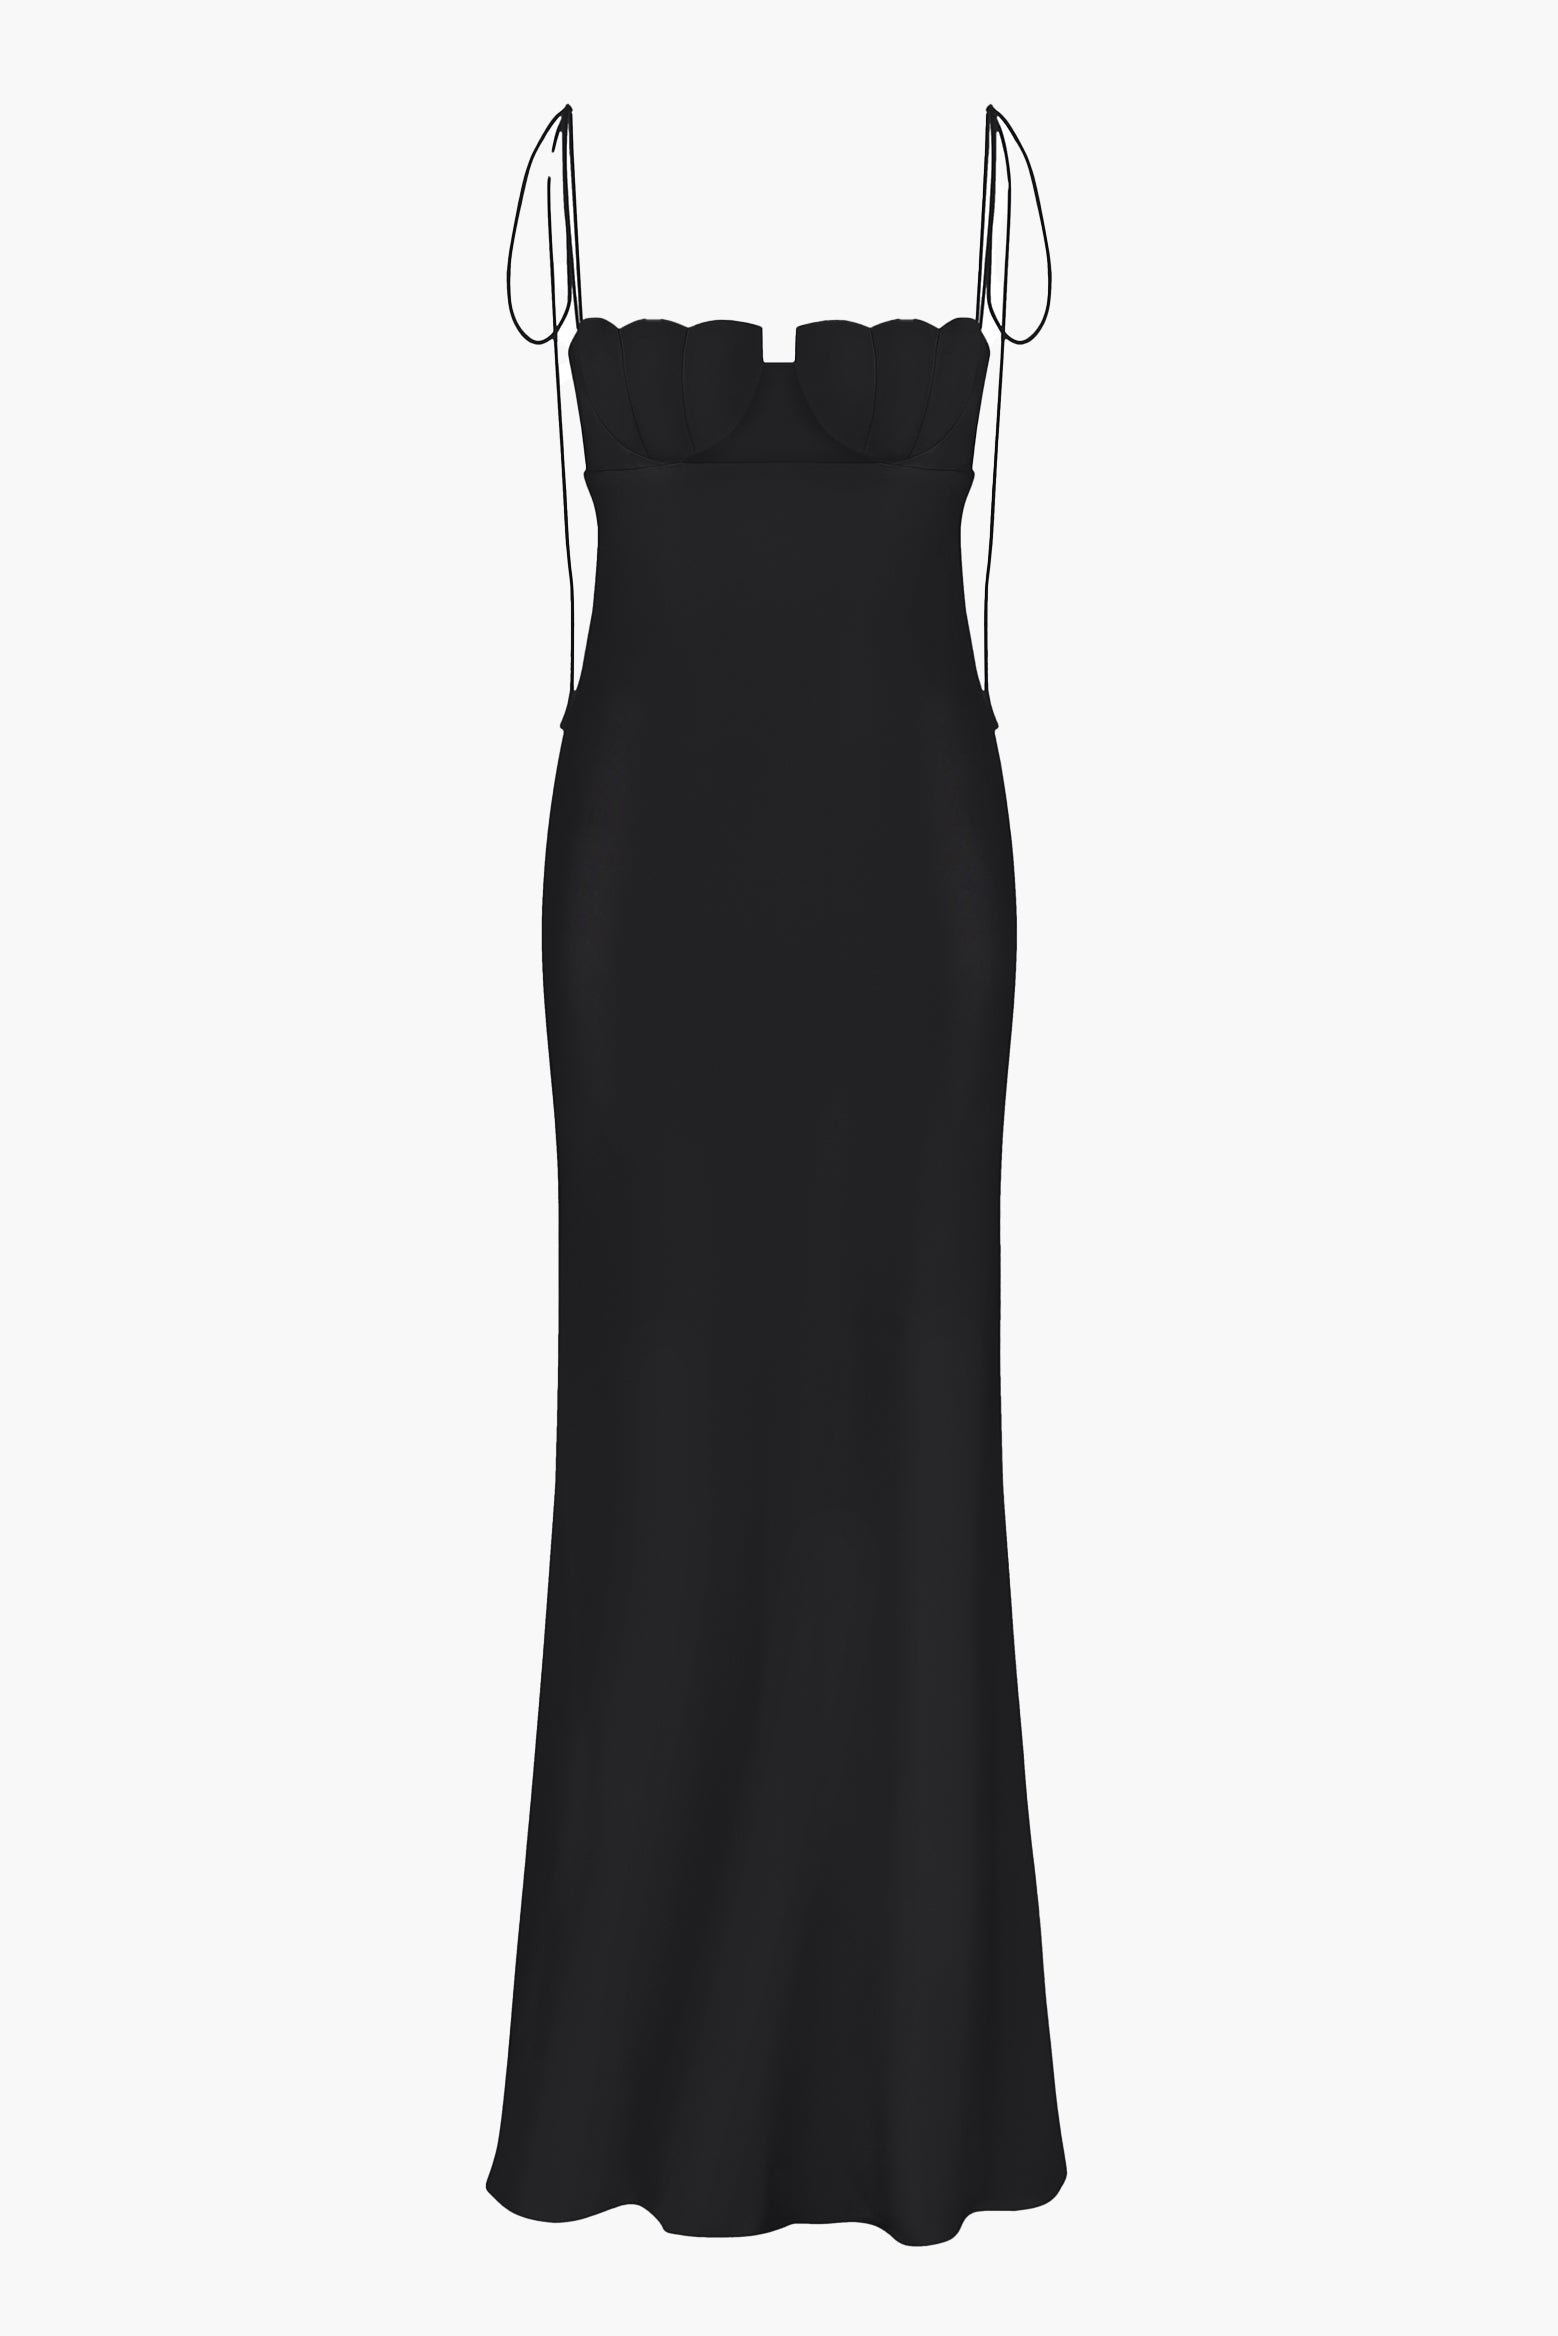 Anna October Tulip Maxi Dress in Black available at The New Trend Australia.